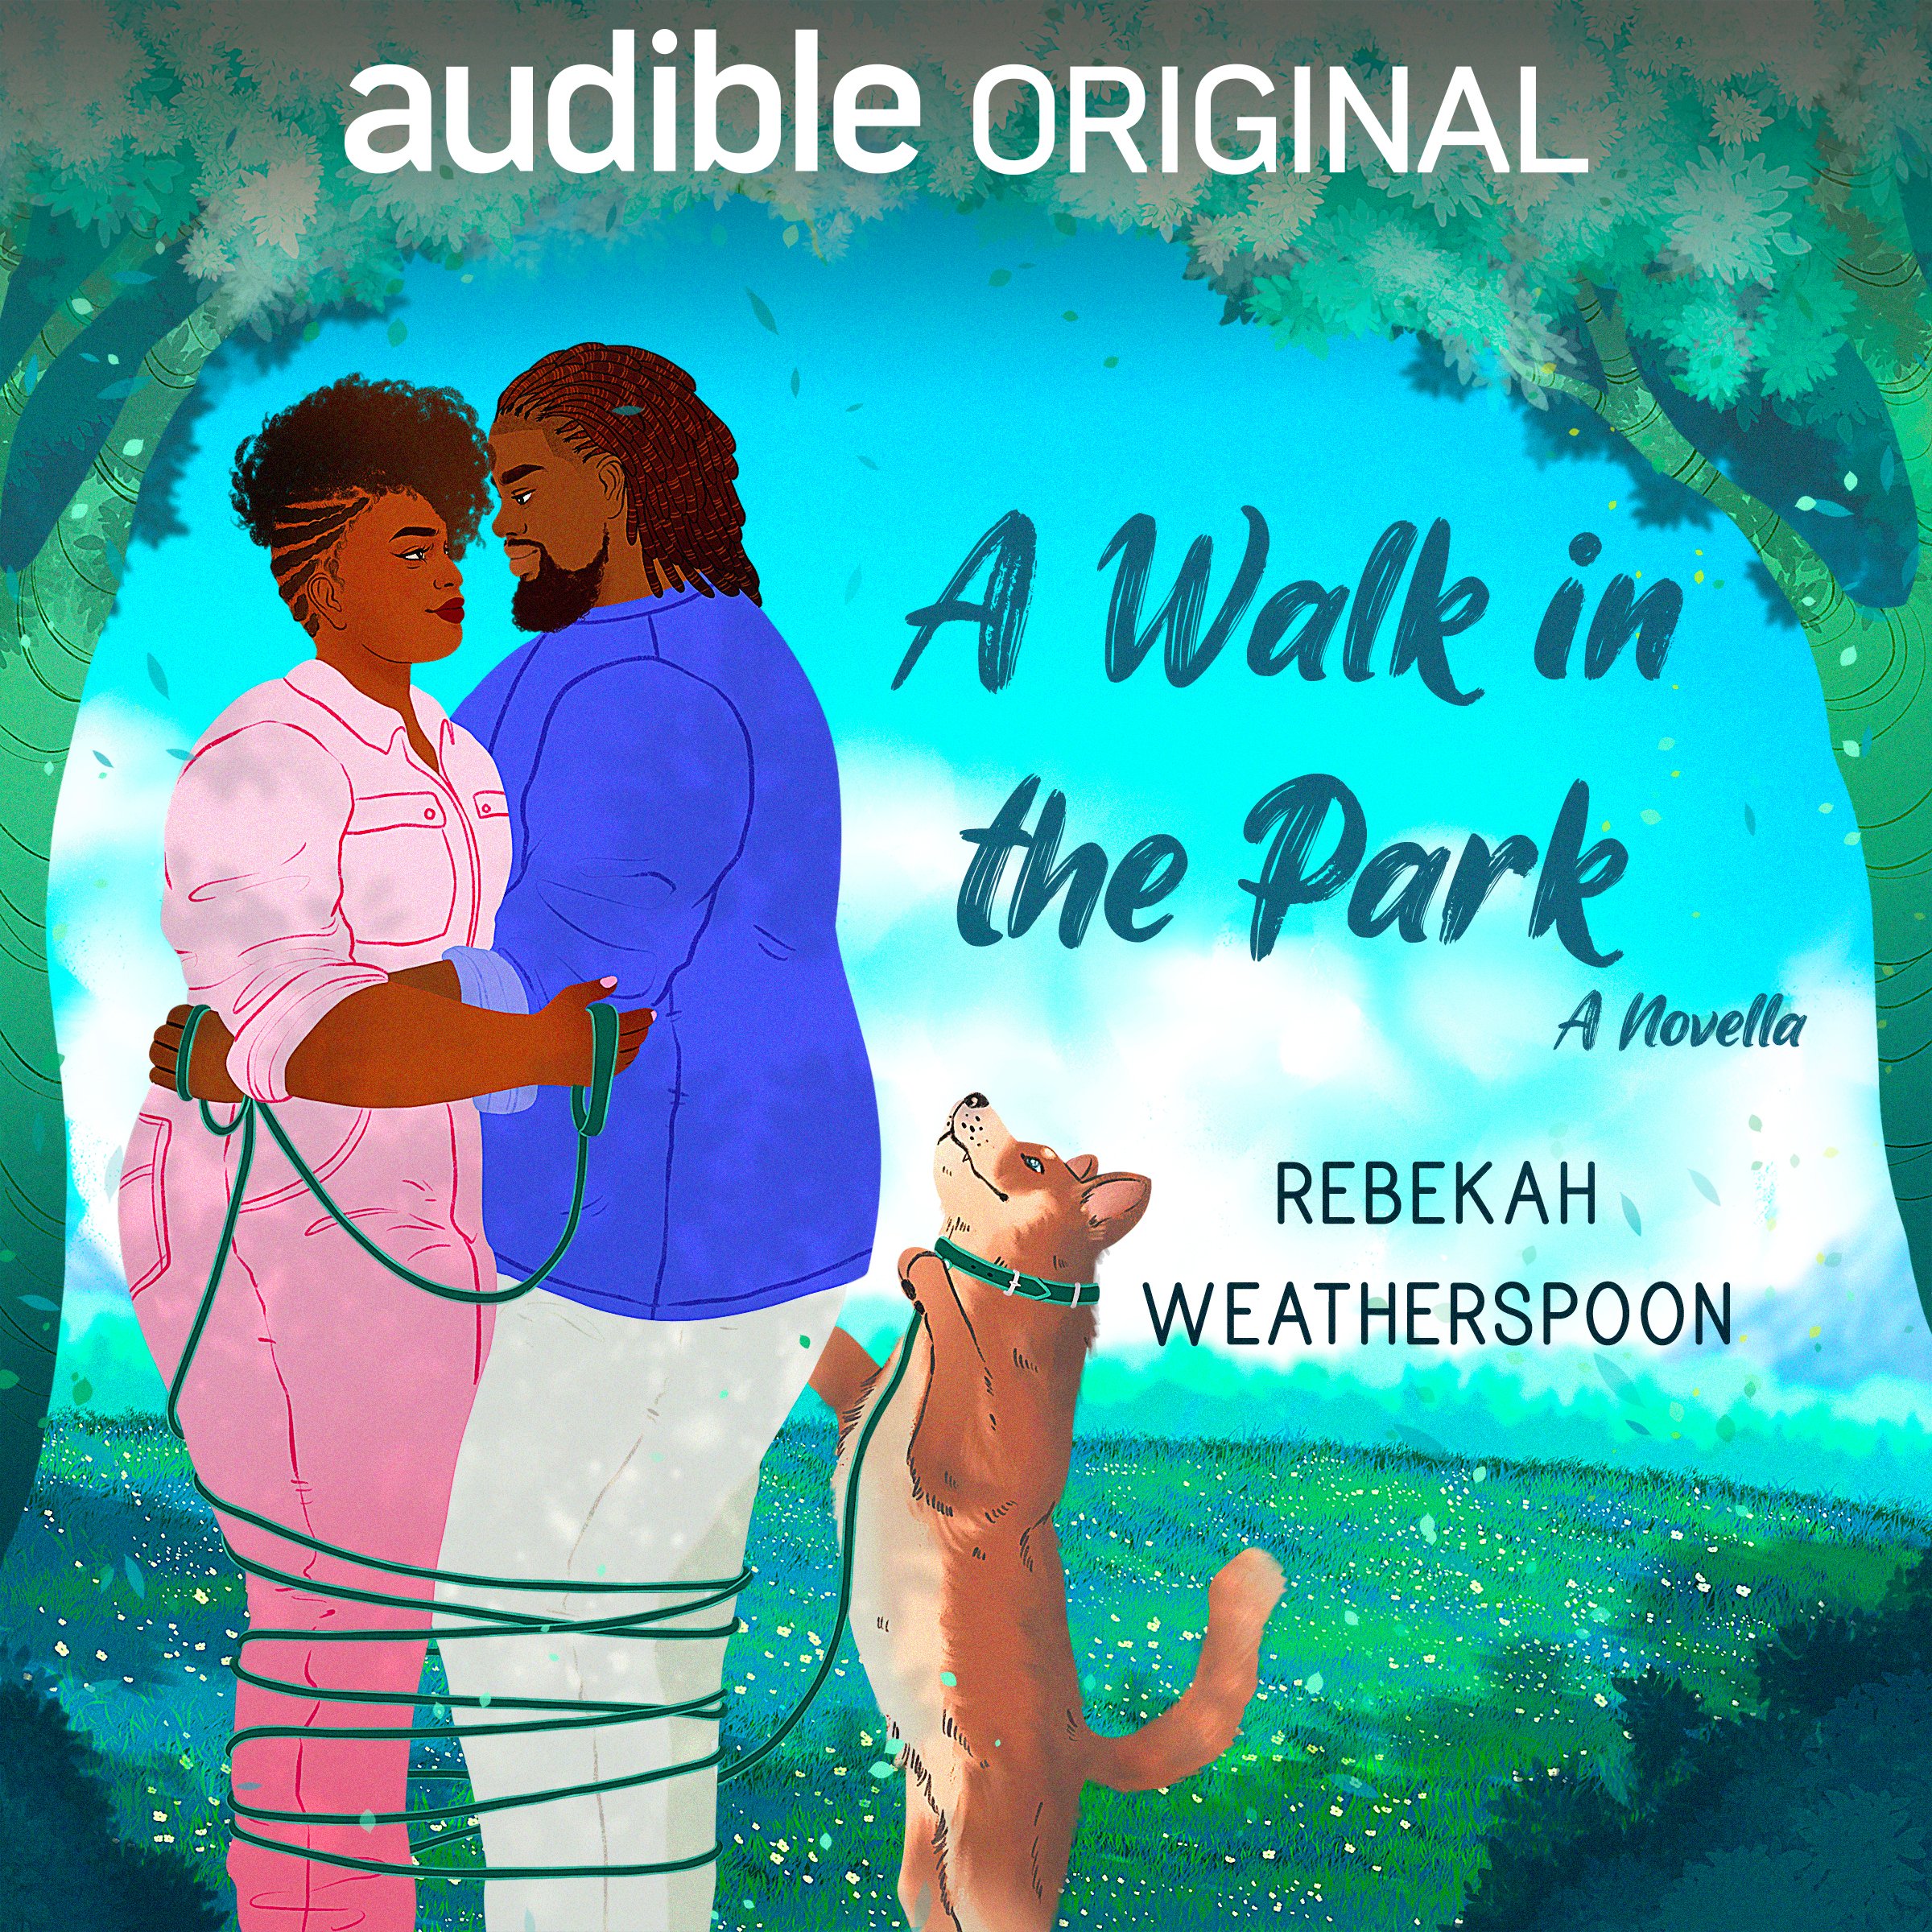 Cover for "A walk in the park" by Rebekah Weatherspoon